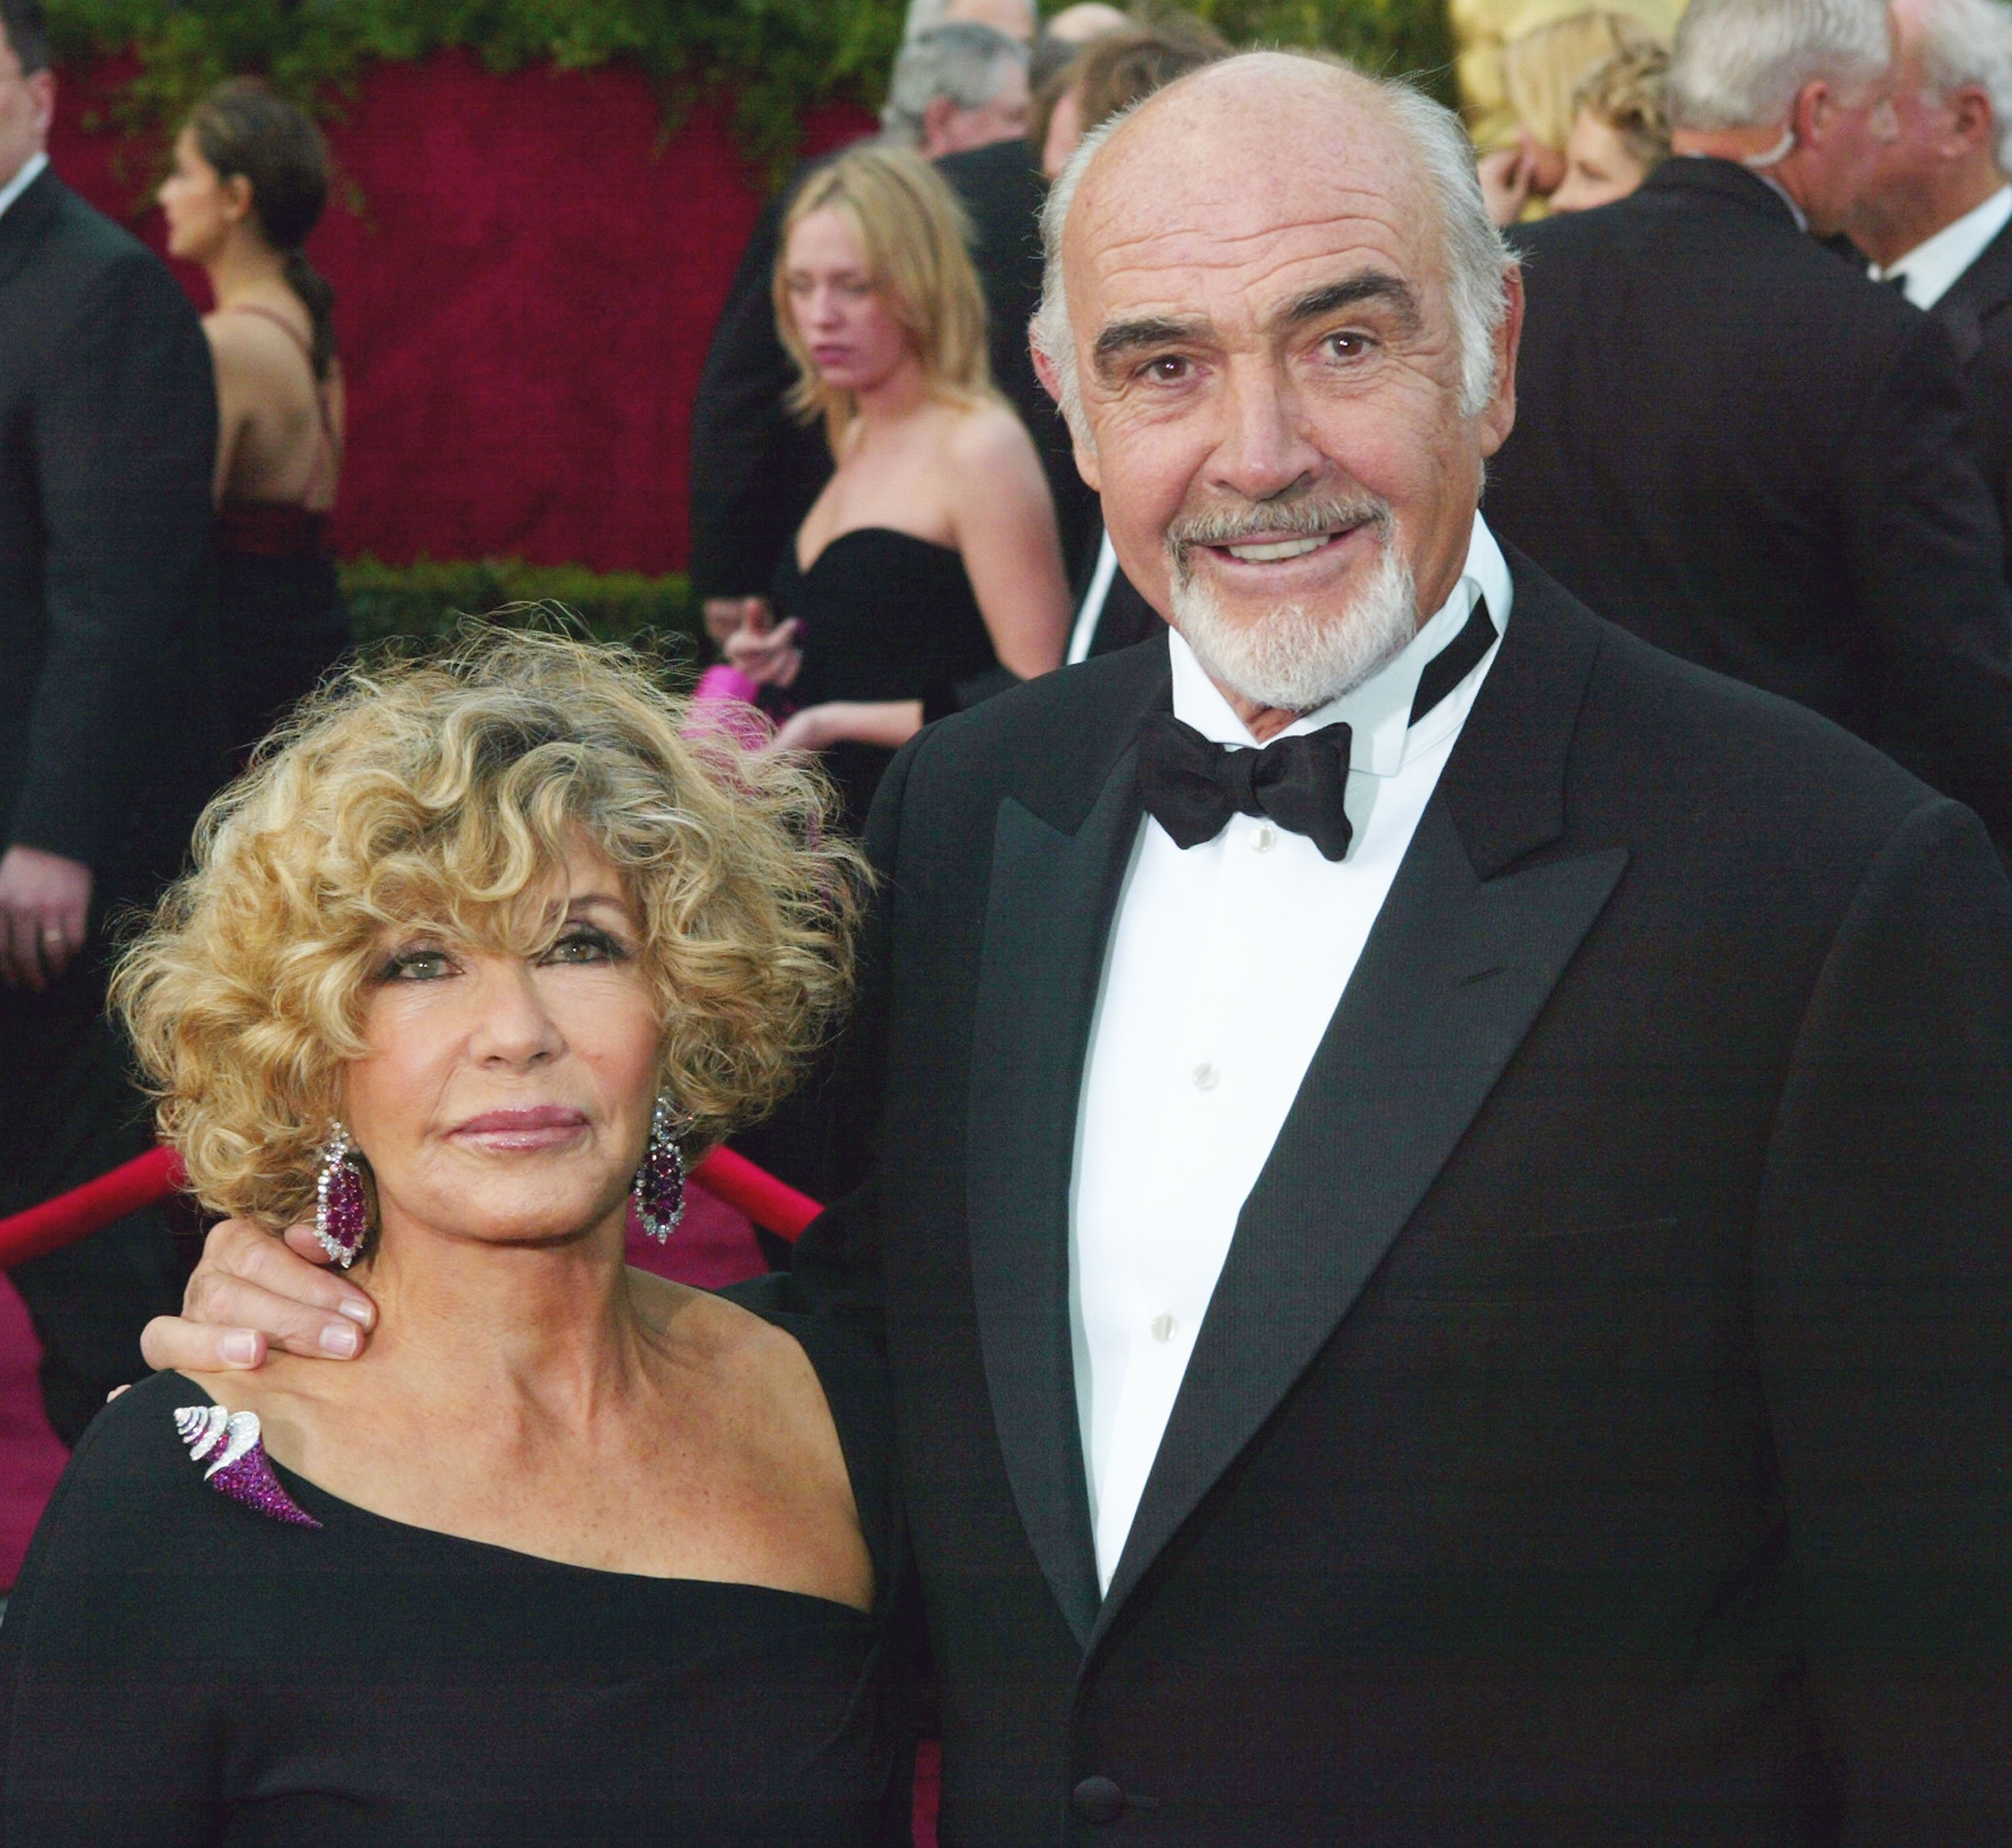 Sean Connery and Micheline Connery attend the 76th Annual Academy Awards at the Kodak Theater on February 29, 2004, in Hollywood, California. | Source: Getty Images